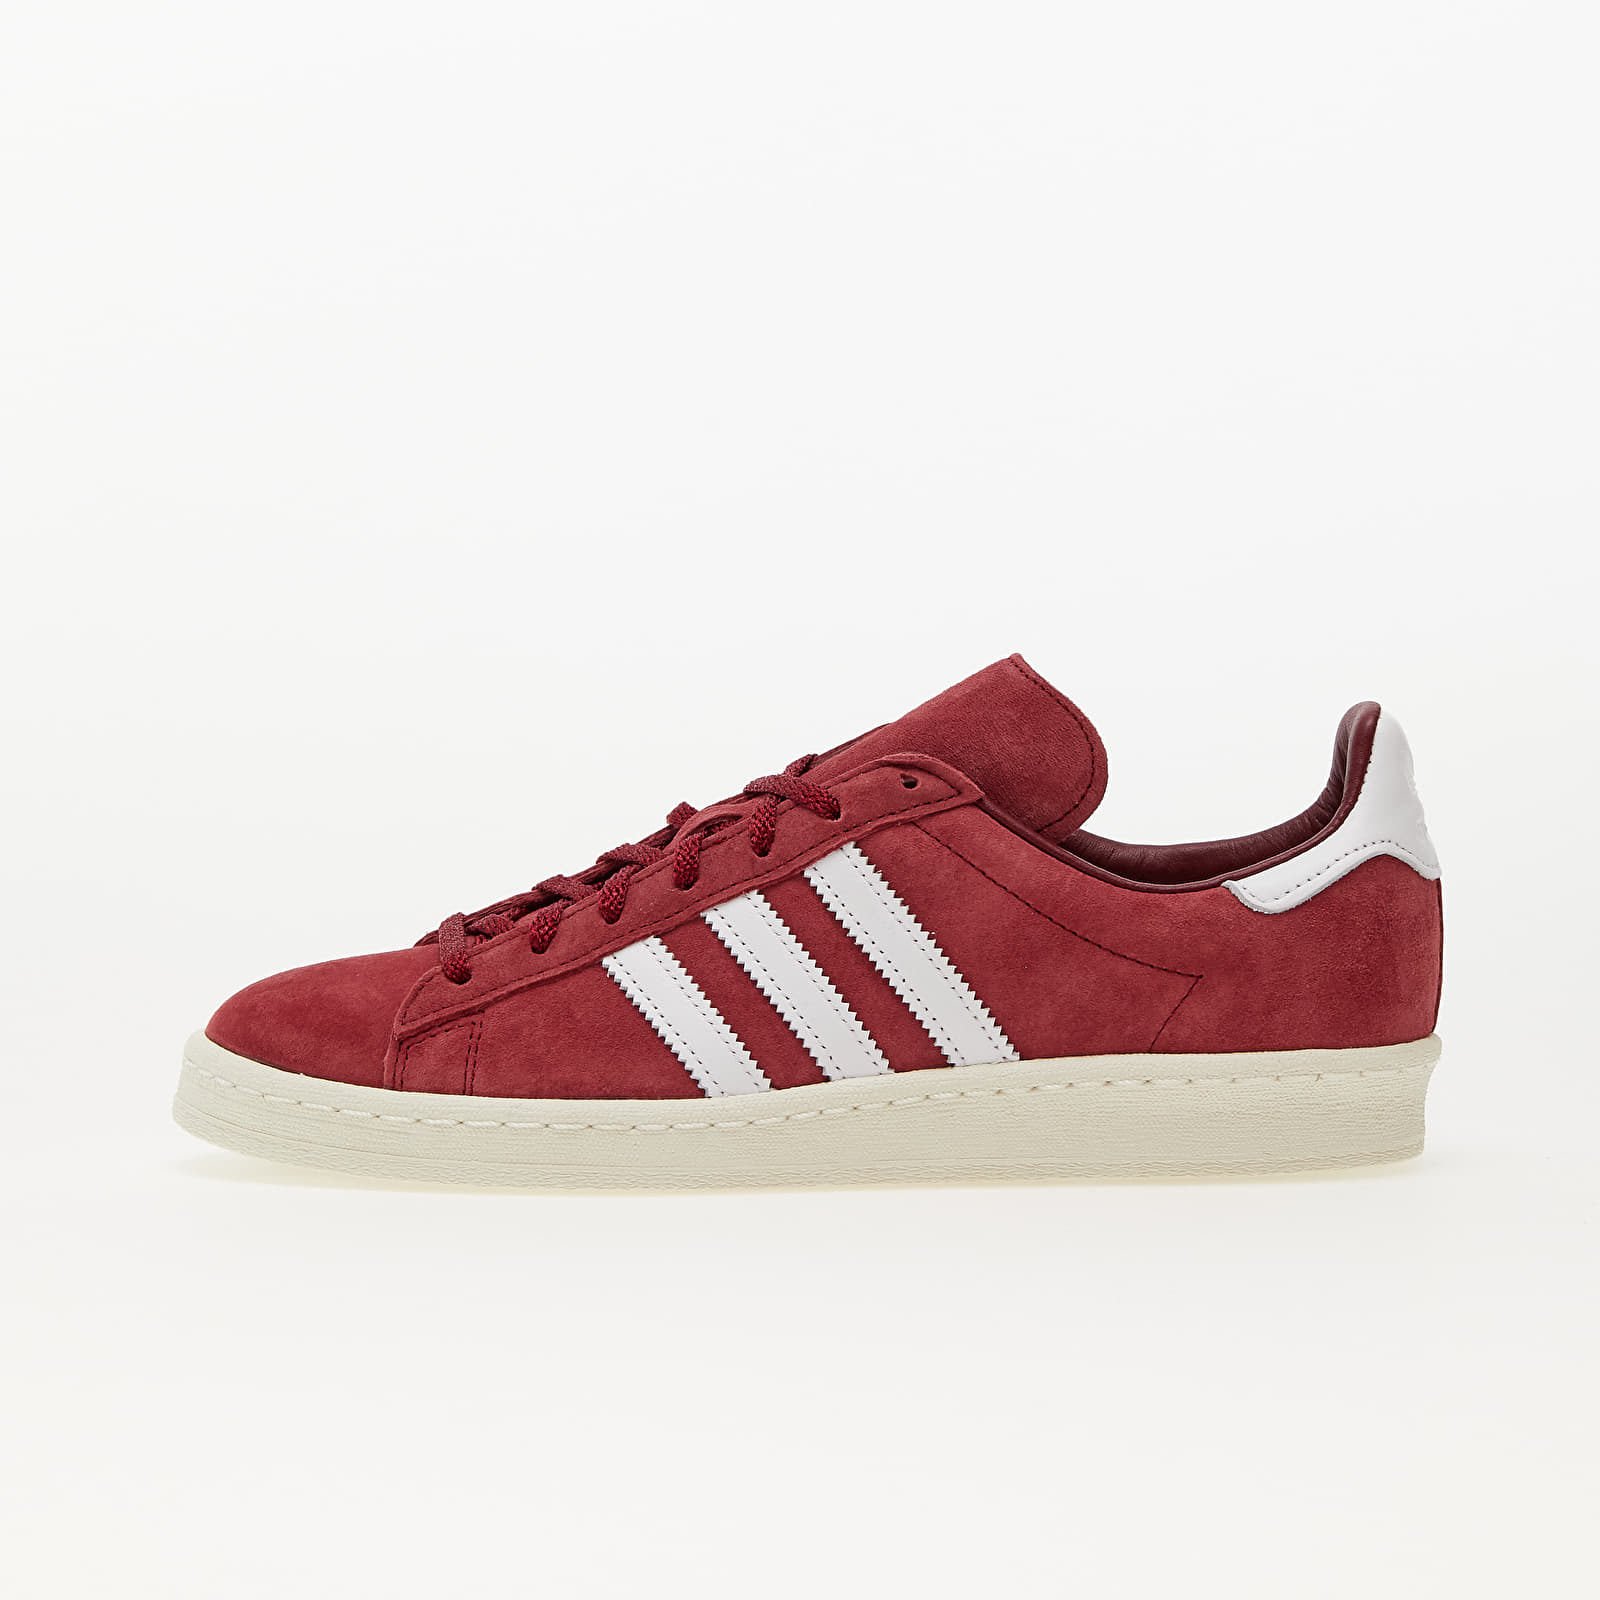 Men's shoes adidas Campus 80s Core Burgundy/ Ftw White/ Off White